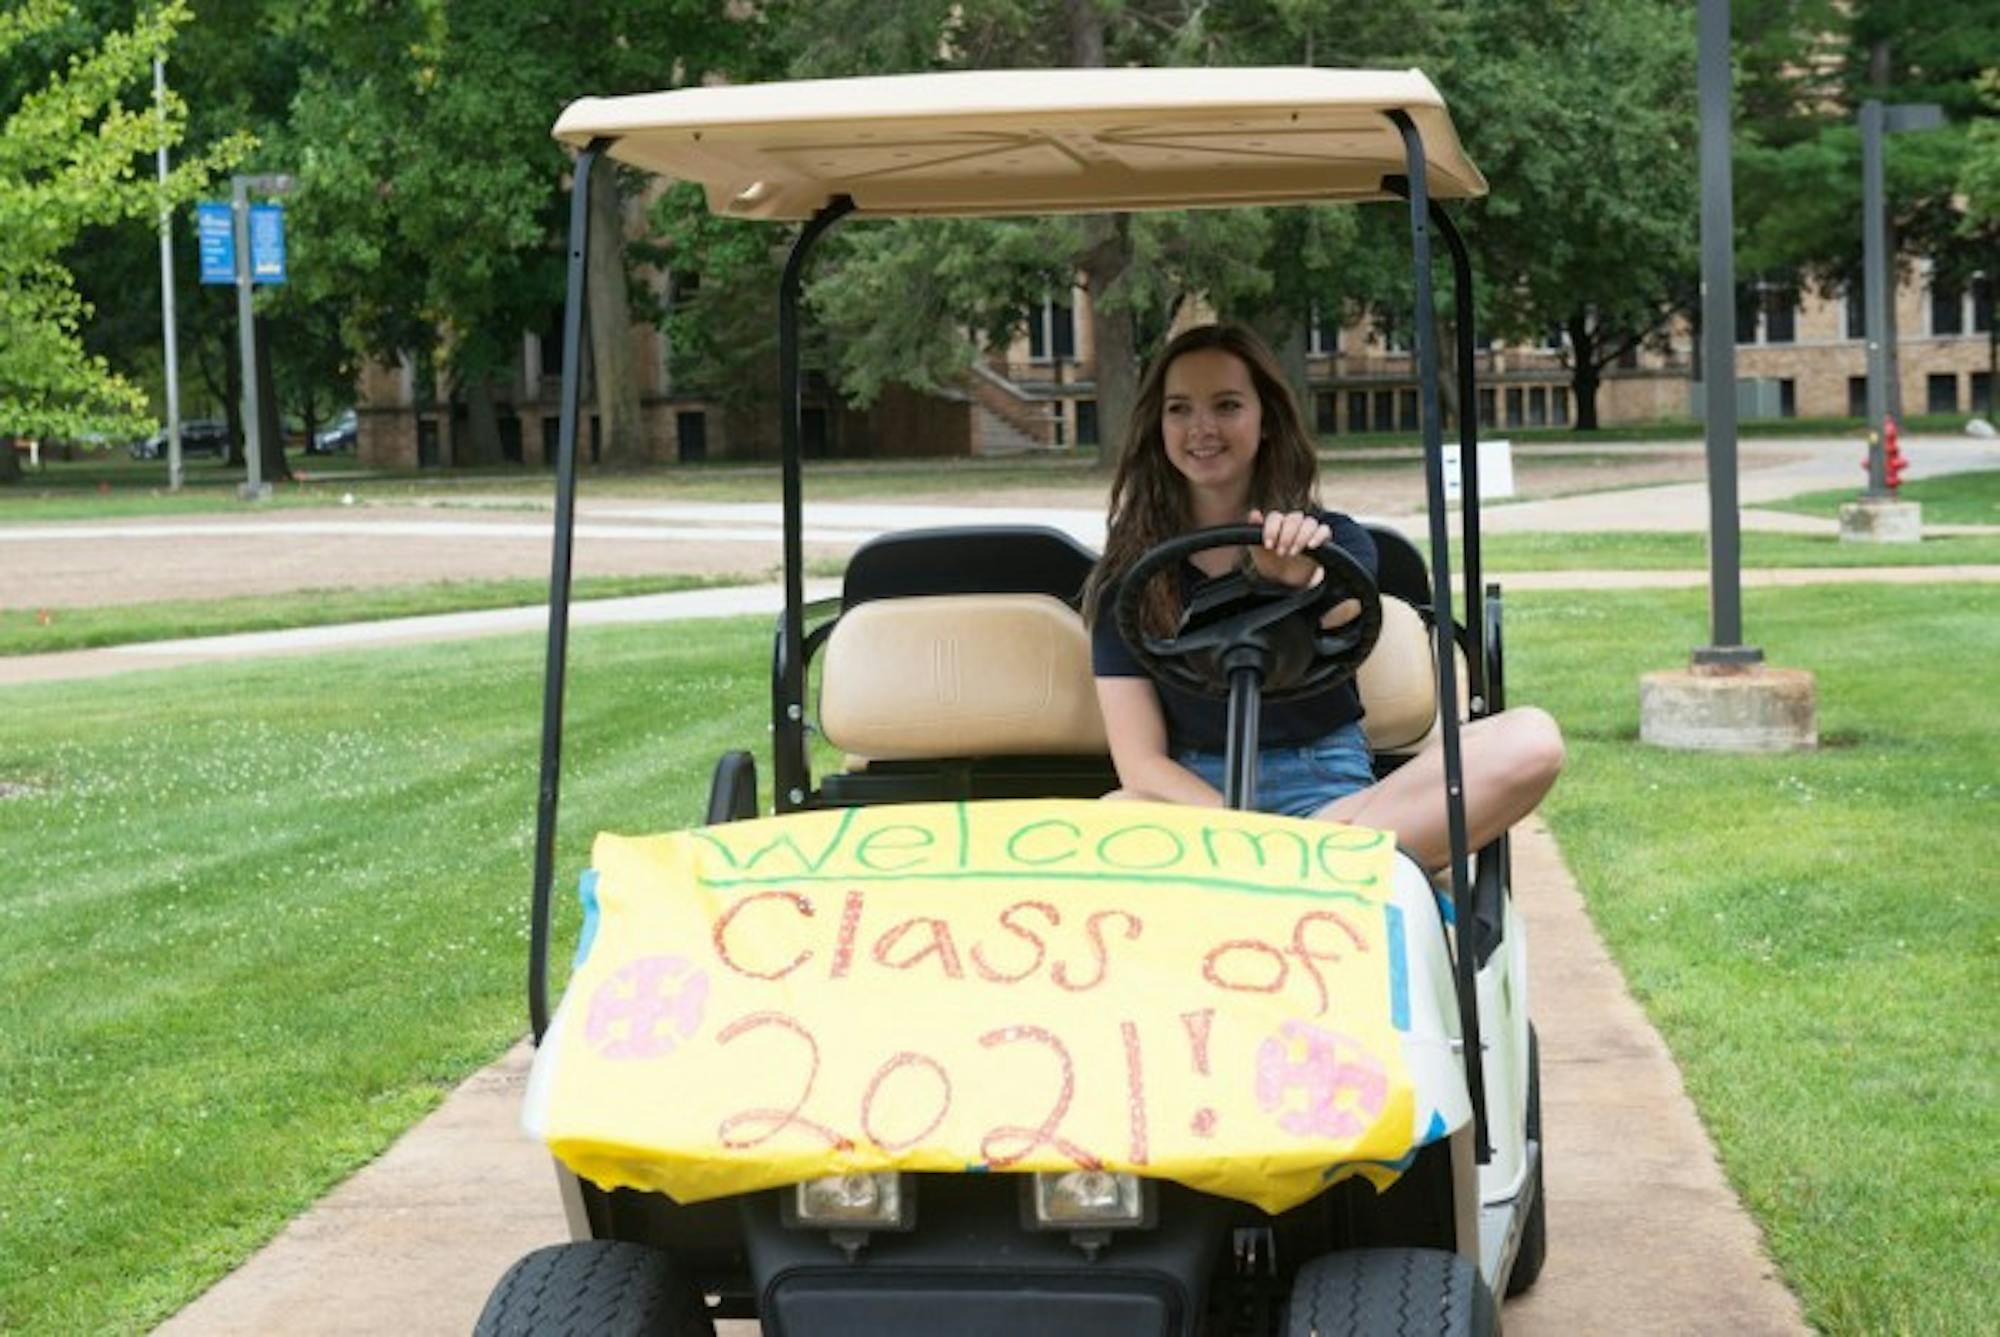 Senior Stephanie Stapleton welcomes incoming Belles to campus by displaying posters with uplifting  messages and by transporting members of the class of 2021 to various campus destinations in golf carts.